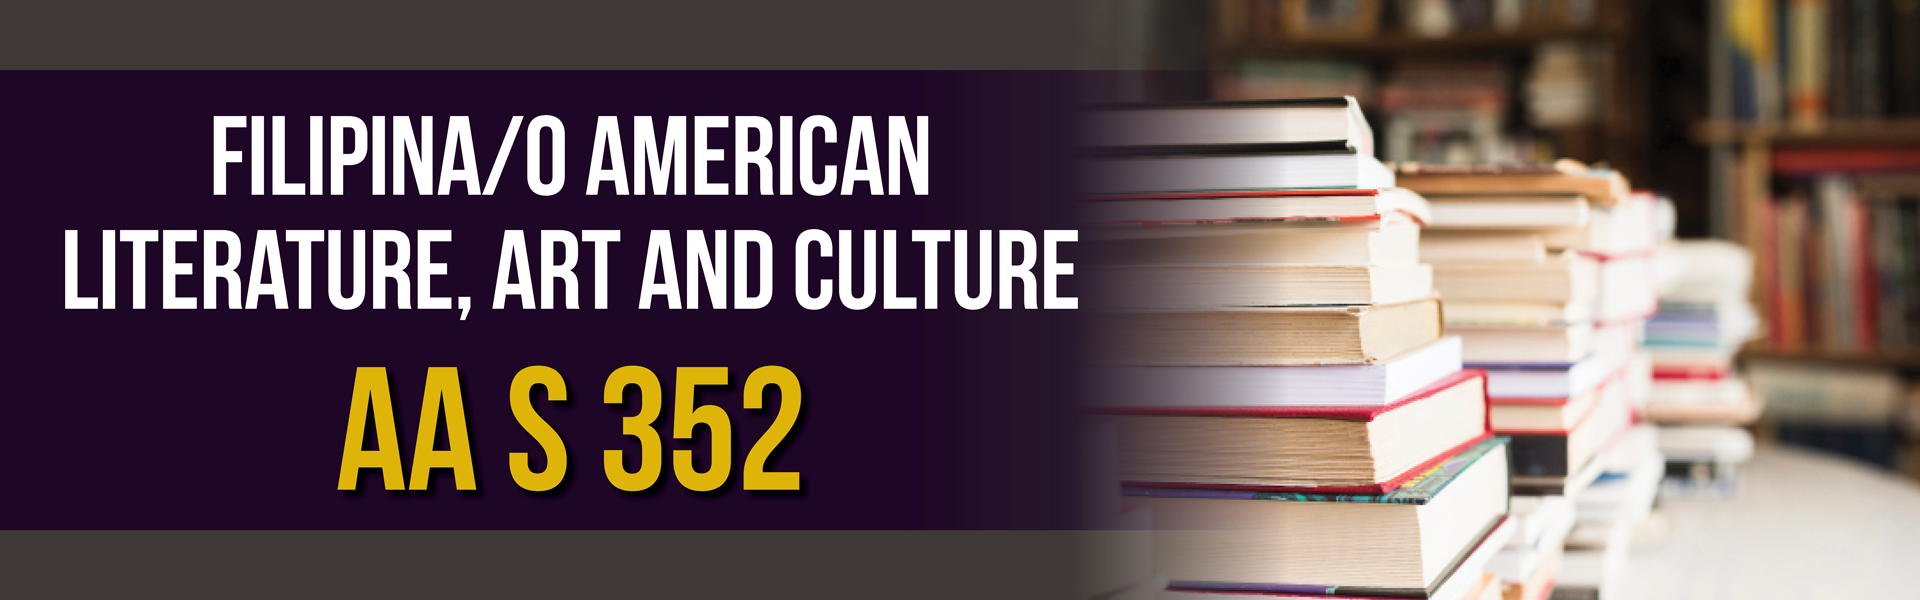 Filipina/o American Literature, Art and Culture AAS 352, staked books in a library